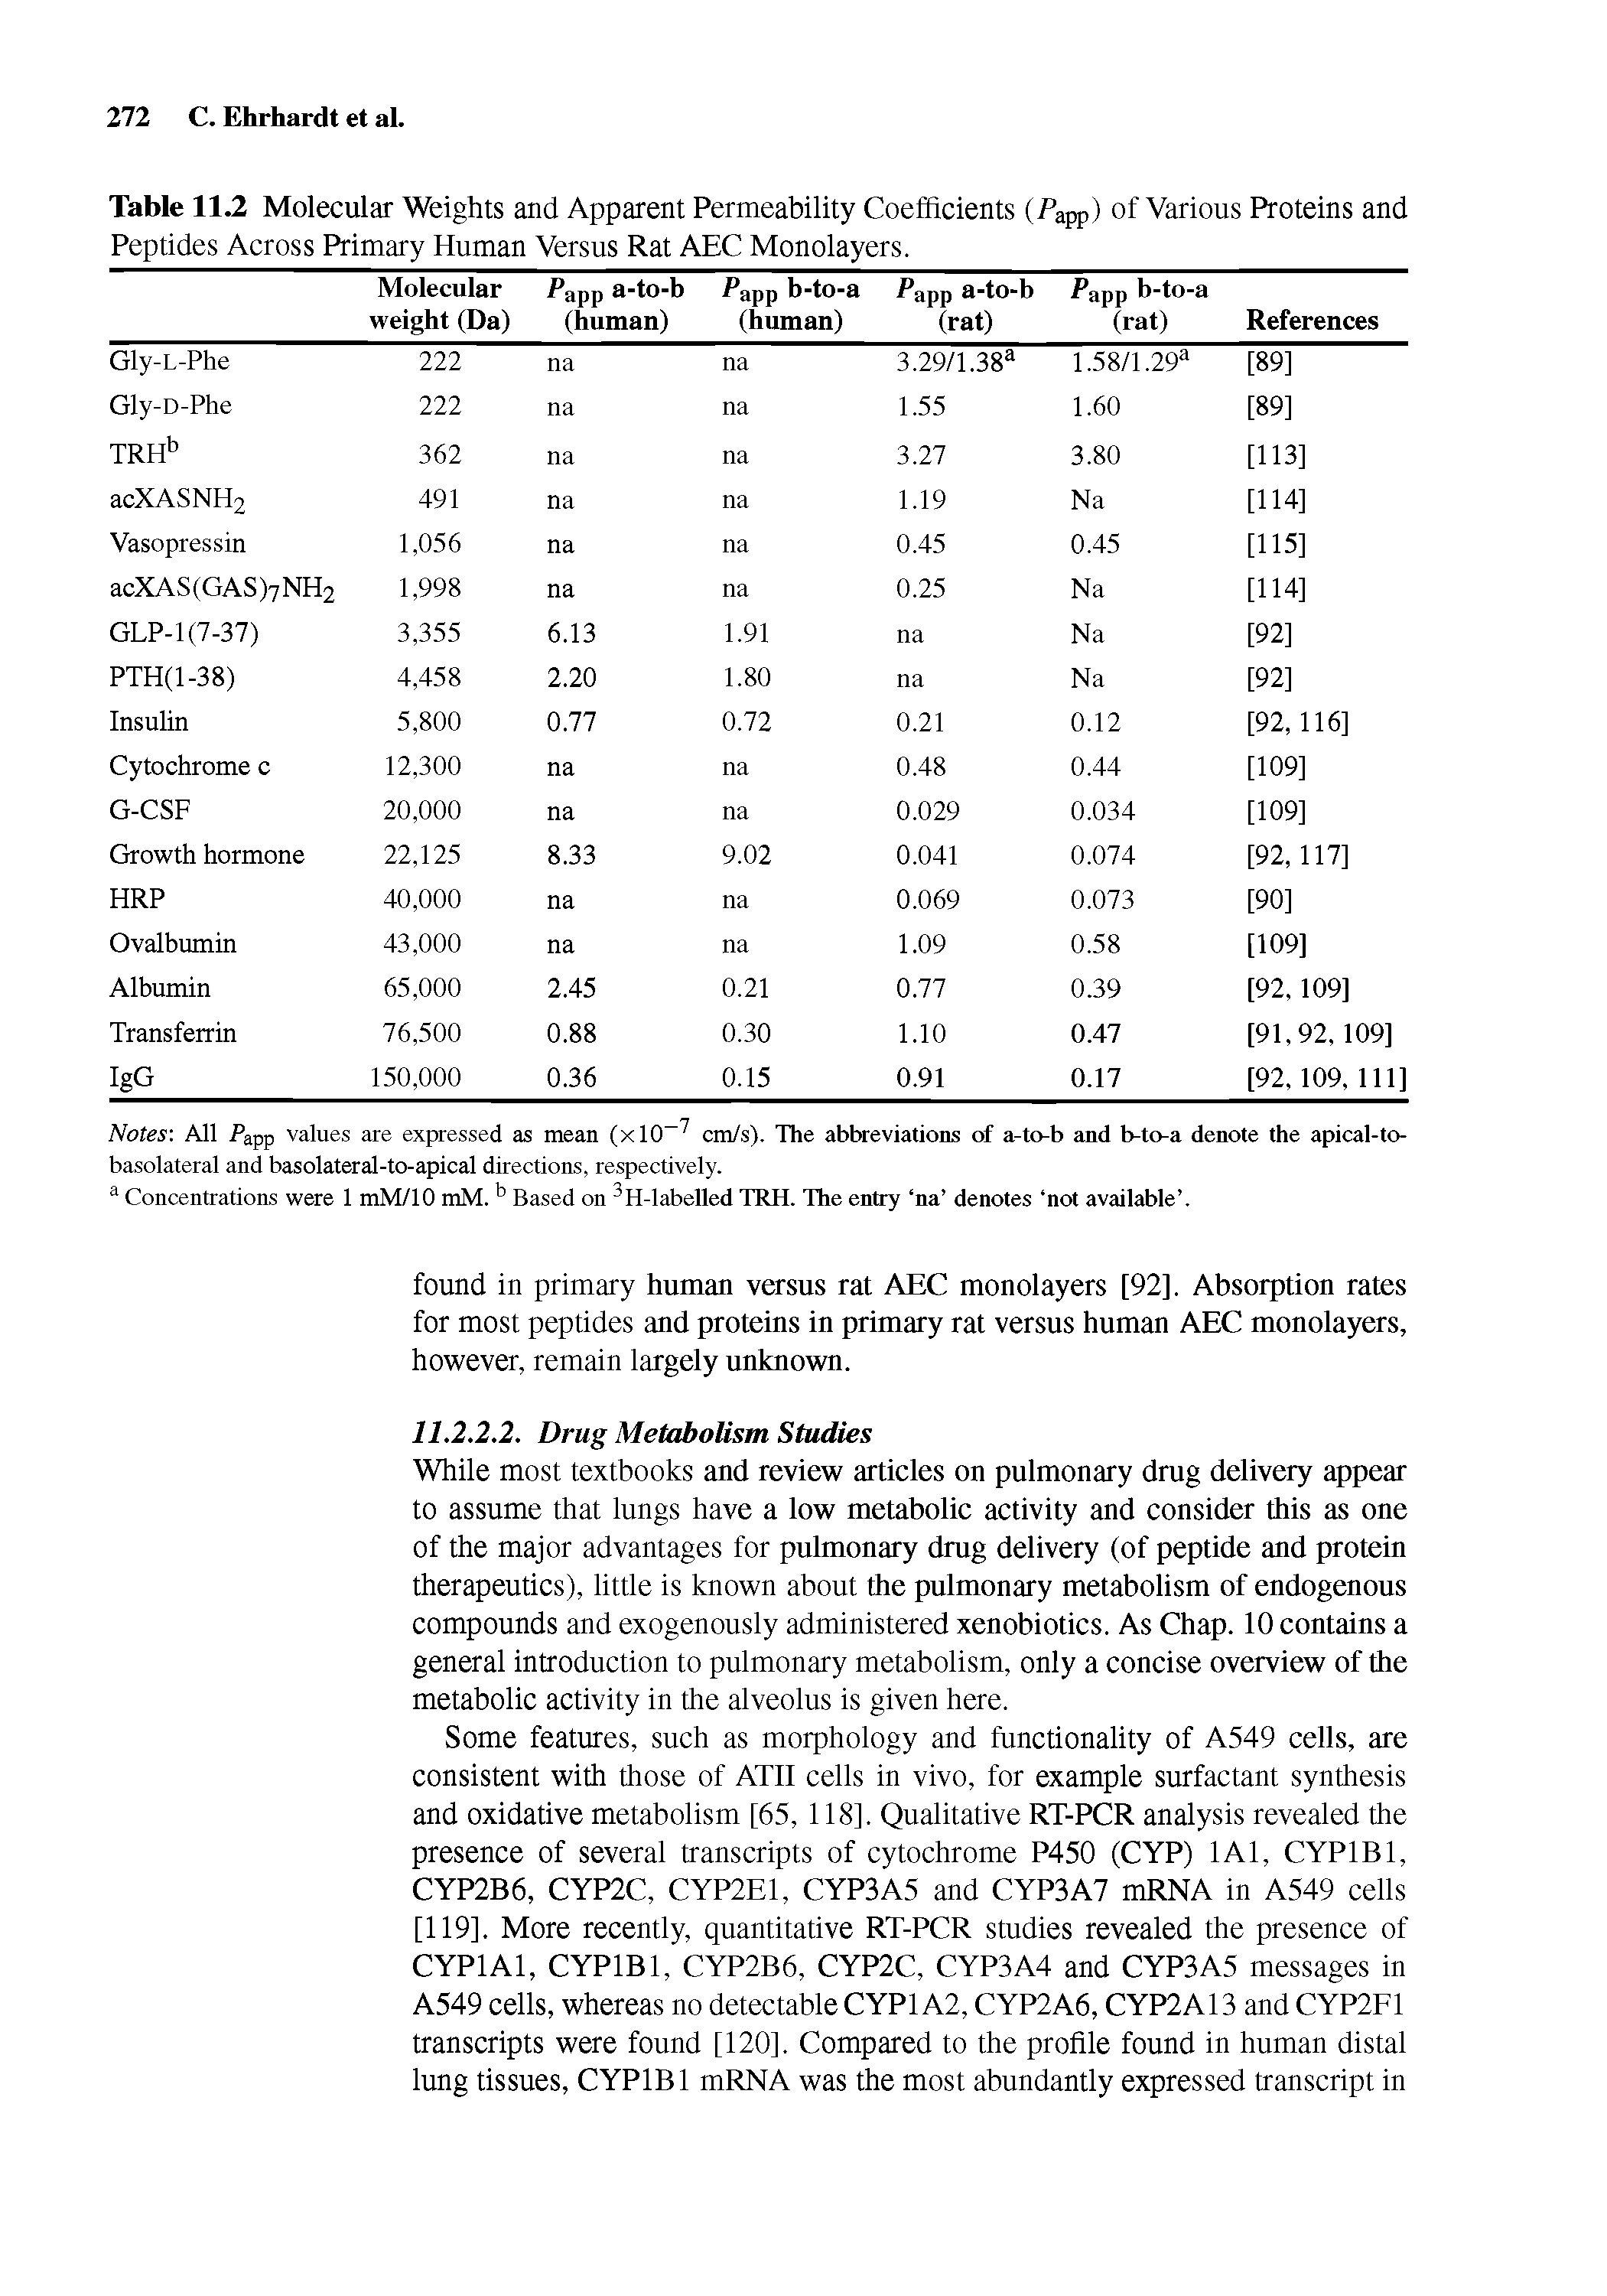 Table 11.2 Molecular Weights and Apparent Permeability Coefficients (Papp) of Various Proteins and Peptides Across Primary Human Versus Rat AEC Monolayers.